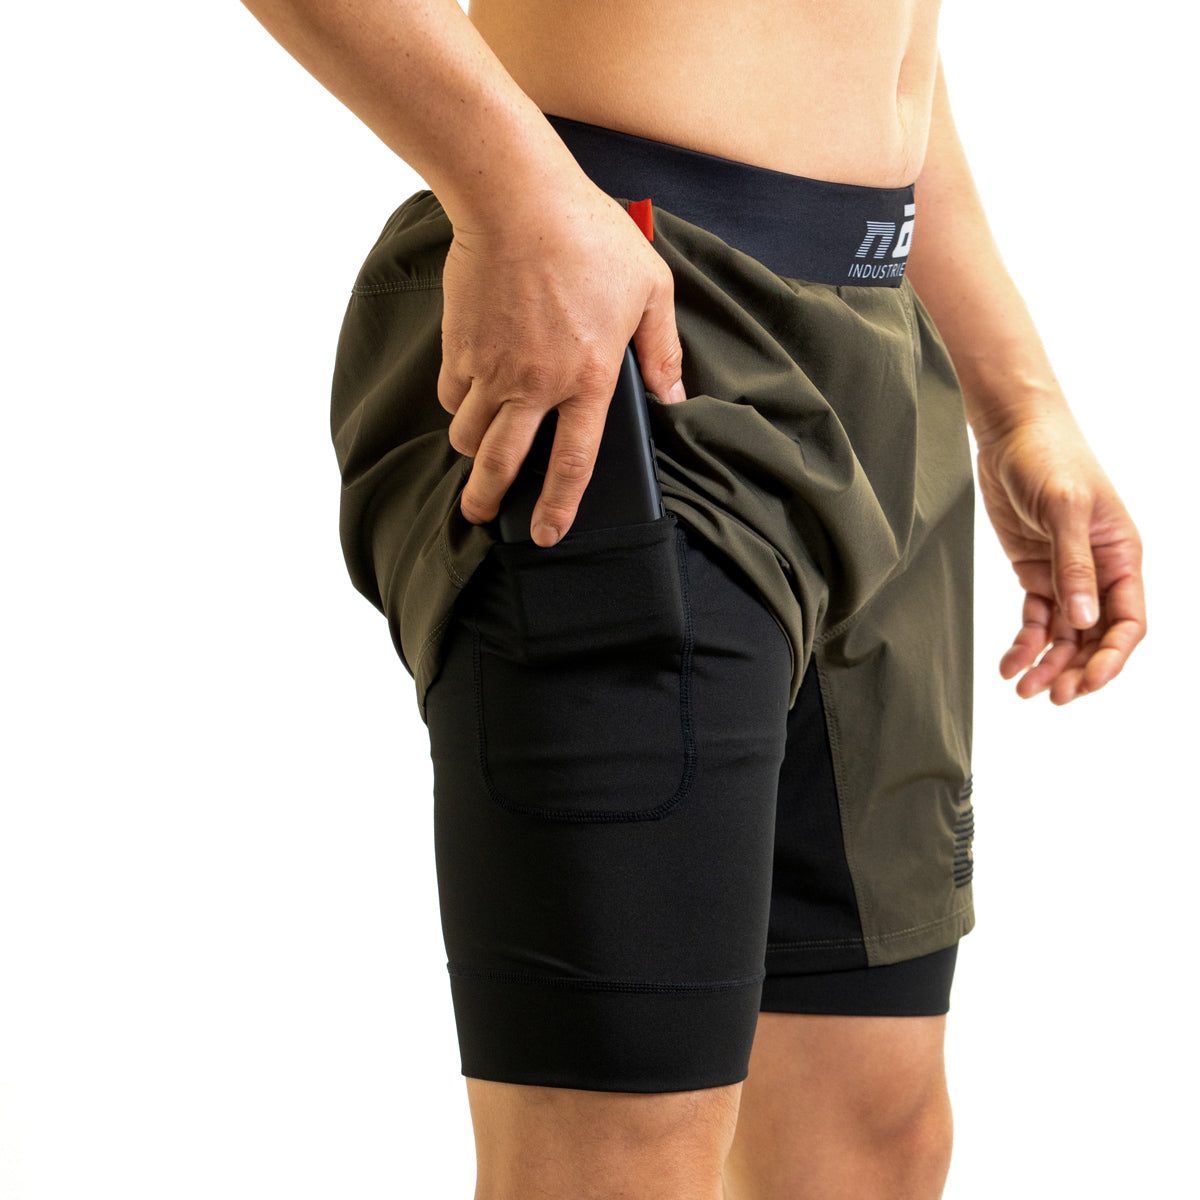 Ghost 7" Premium Lined Grappling Shorts - Fury Green Pocket Detail